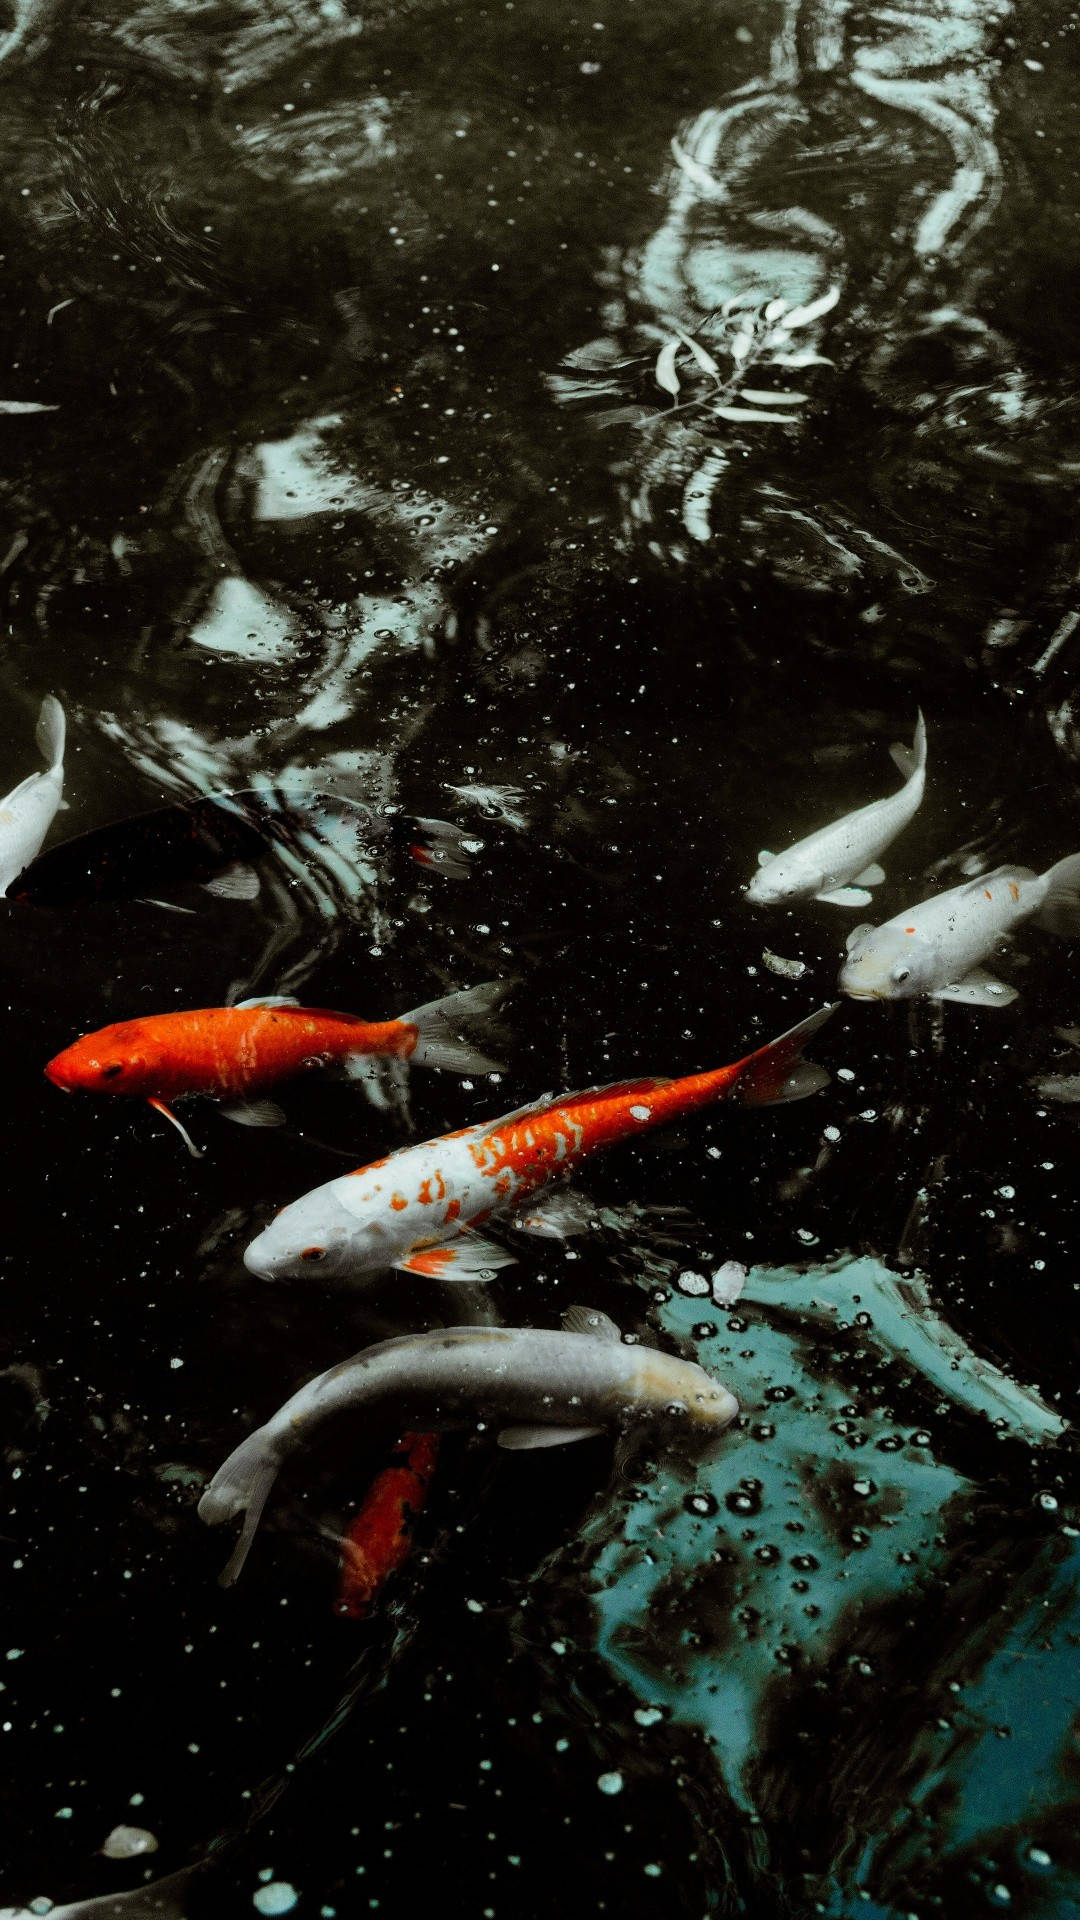 A group of colorful koi fish swimming in a pond - Koi fish, fish